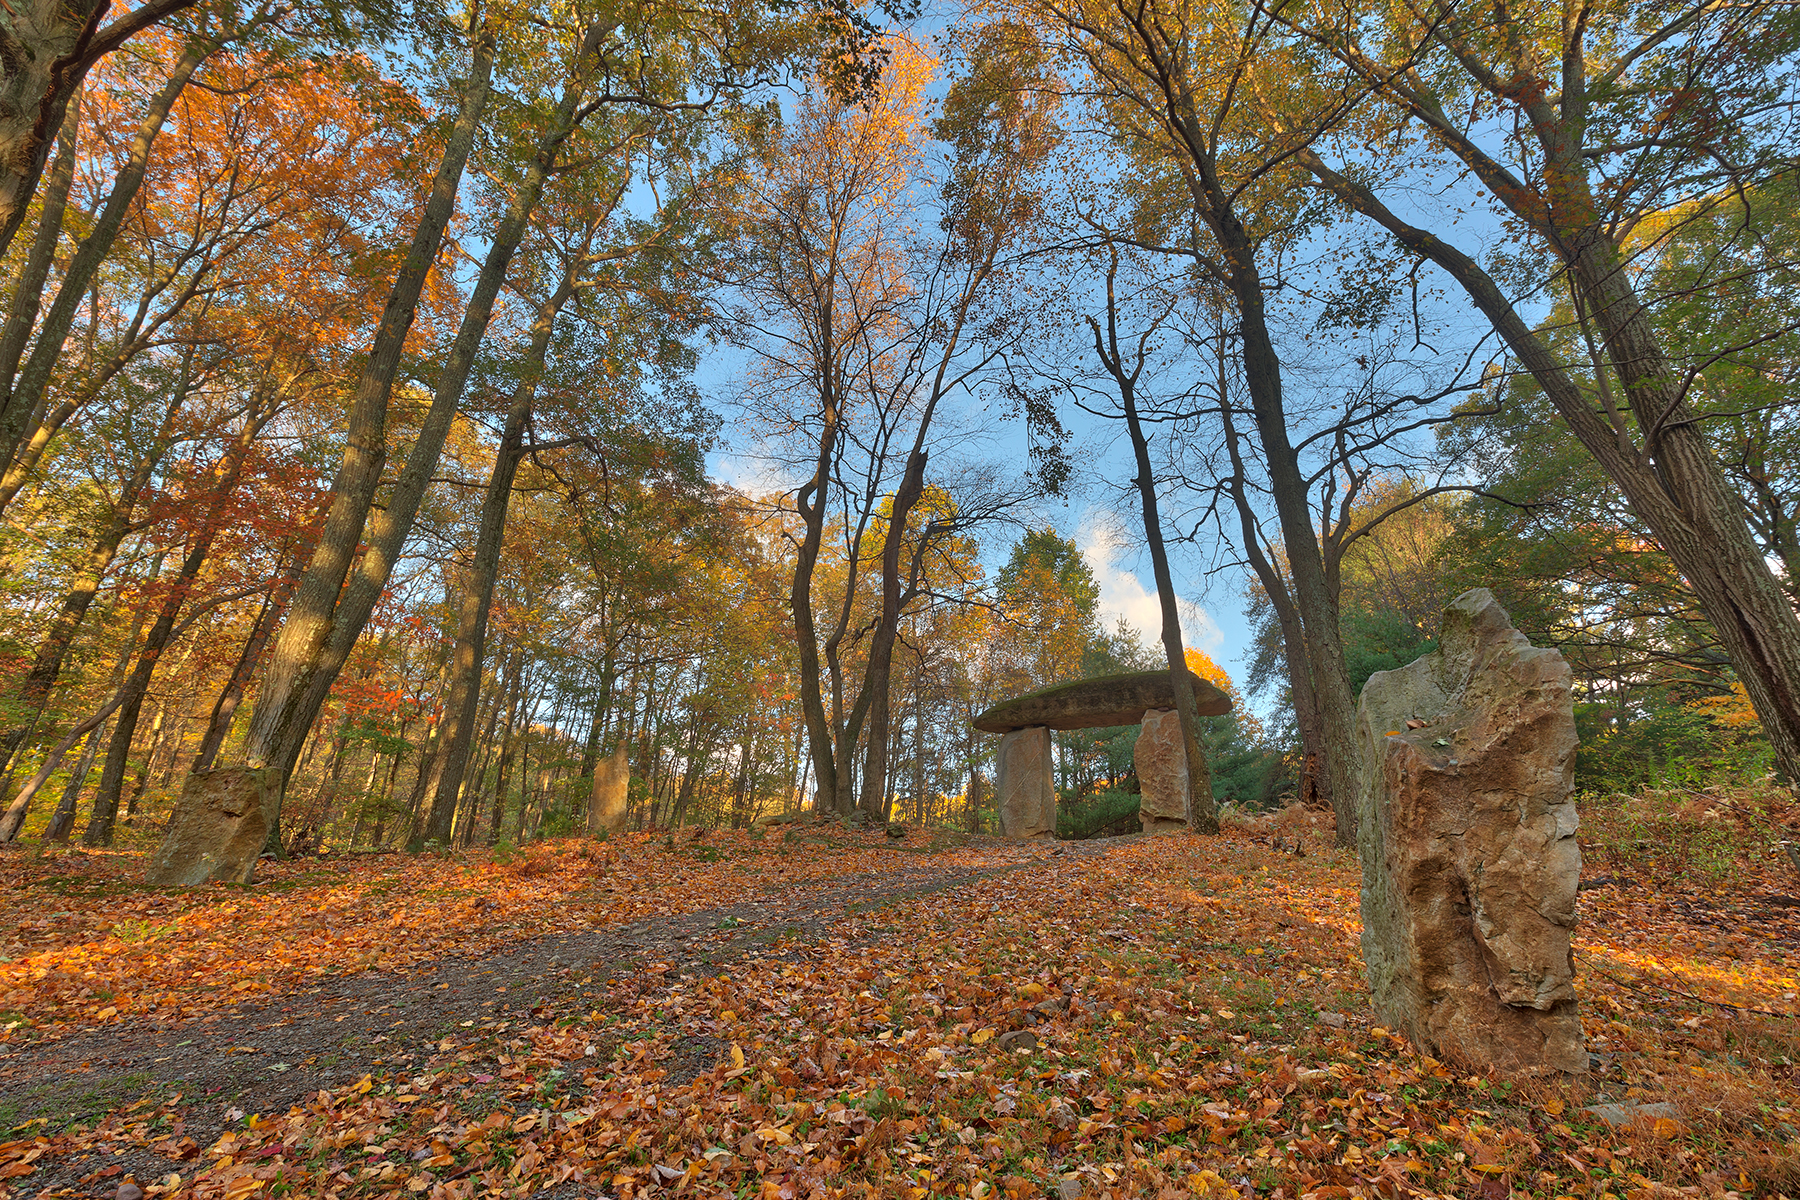 Autumn megalith forest trail - hdr photo